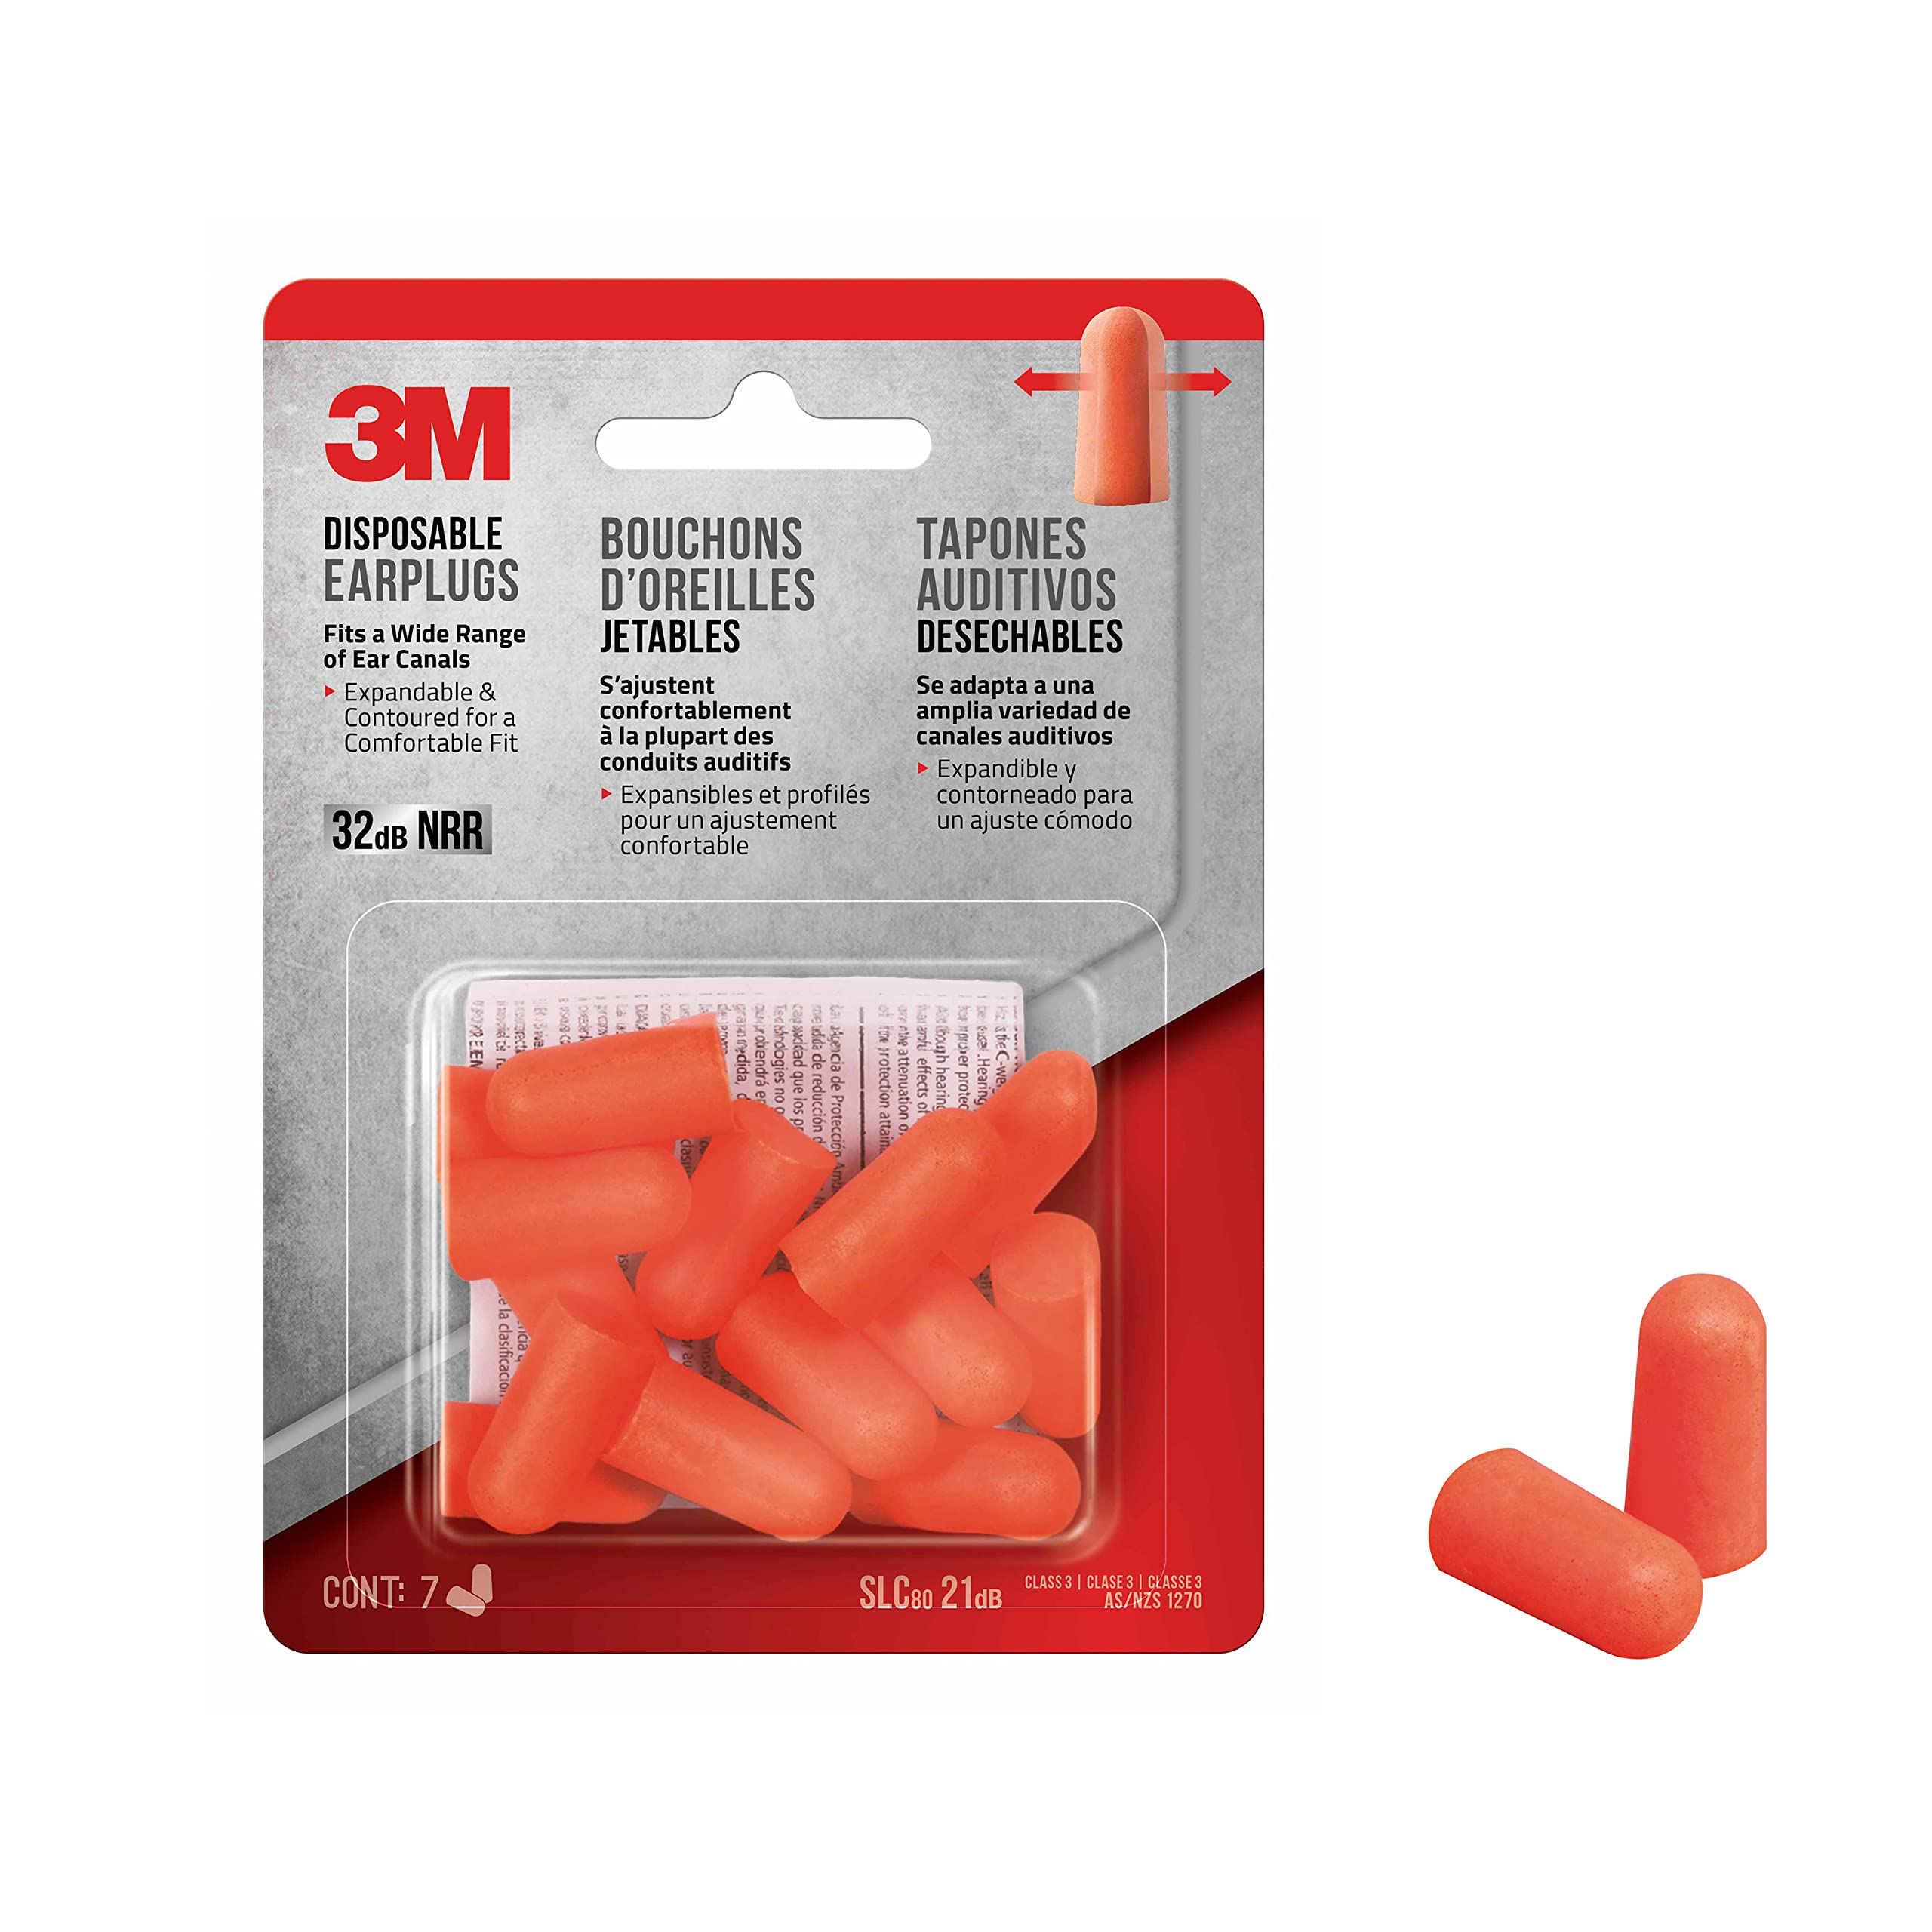 3M Disposable Earplugs, Lightweight and Pliable Ear Plugs, NRR 32dB, 7-Pair